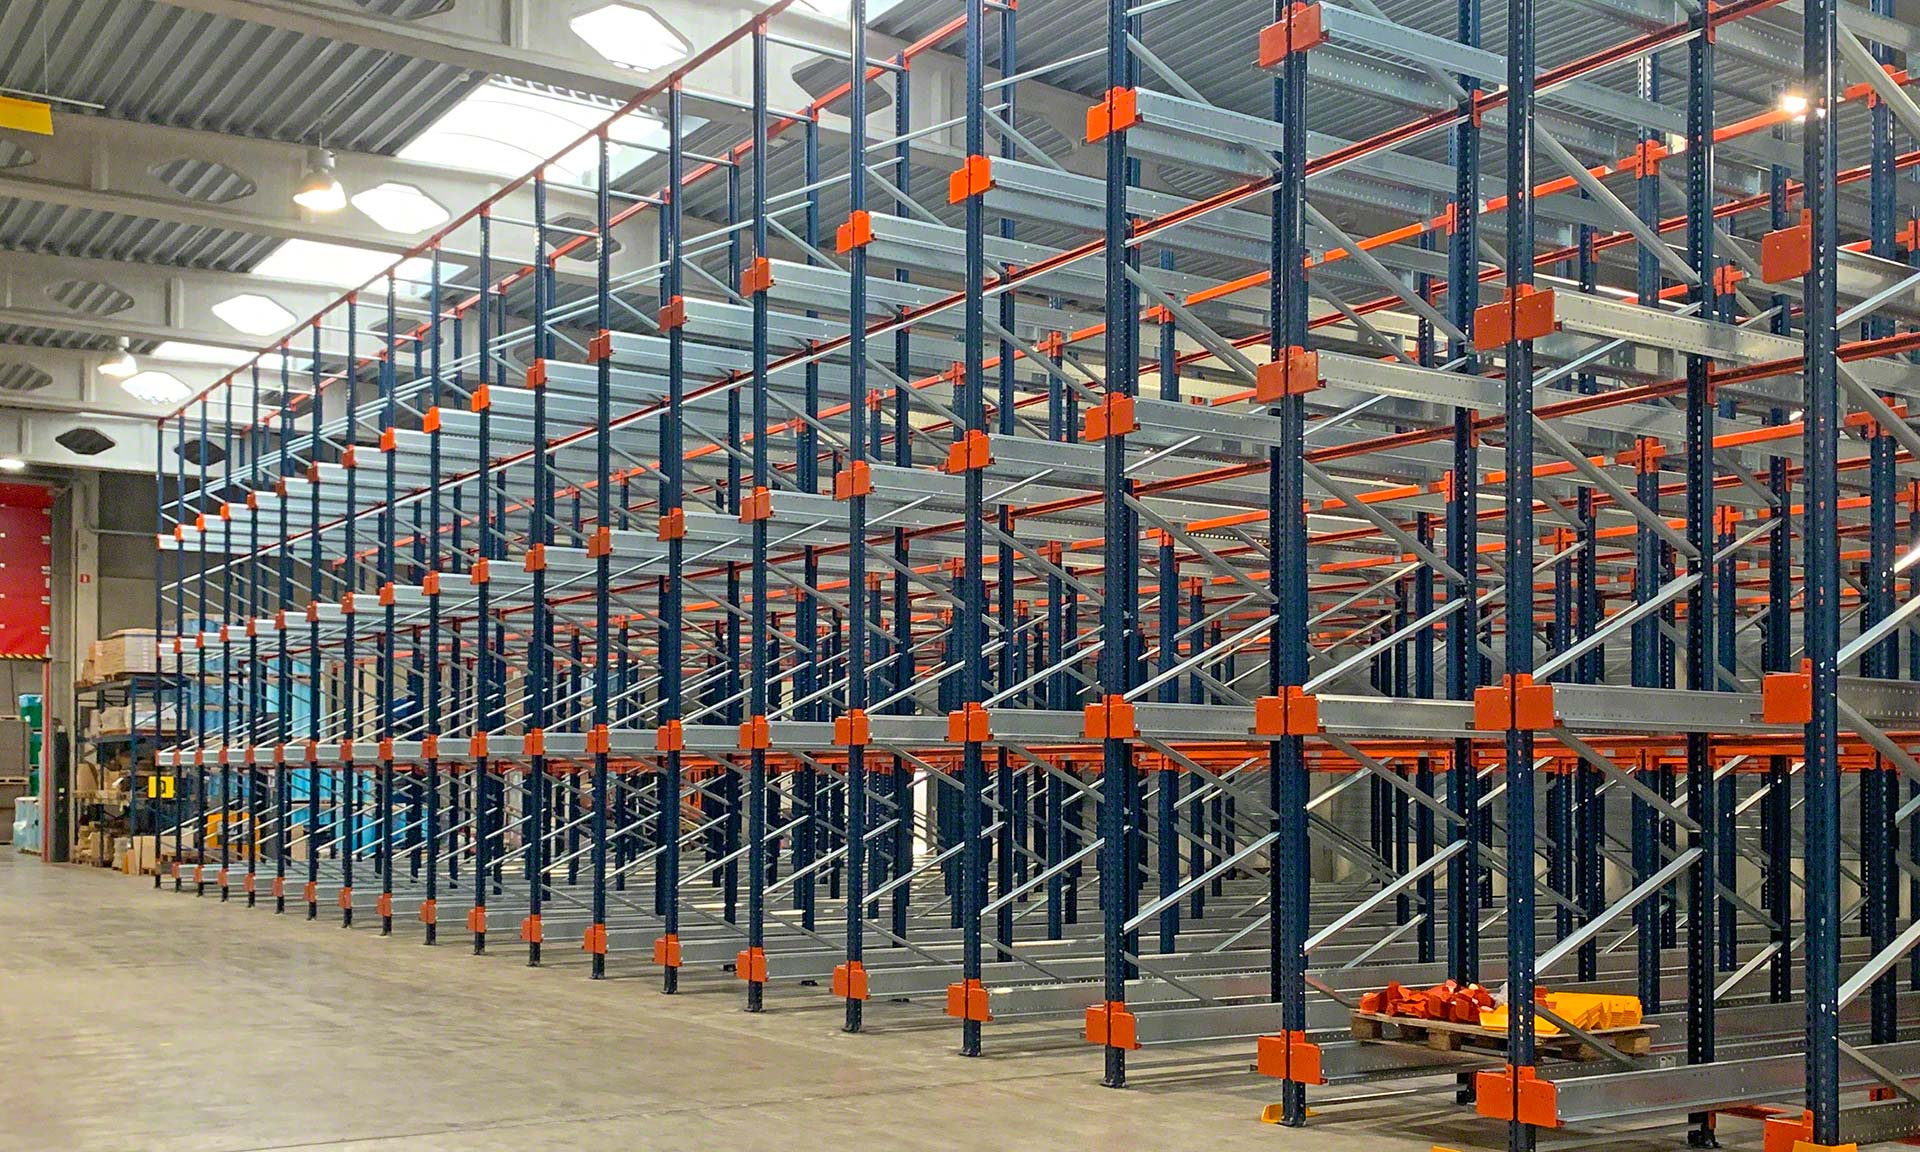 Manna Foods' warehouse in Belgium with the Pallet Shuttle system